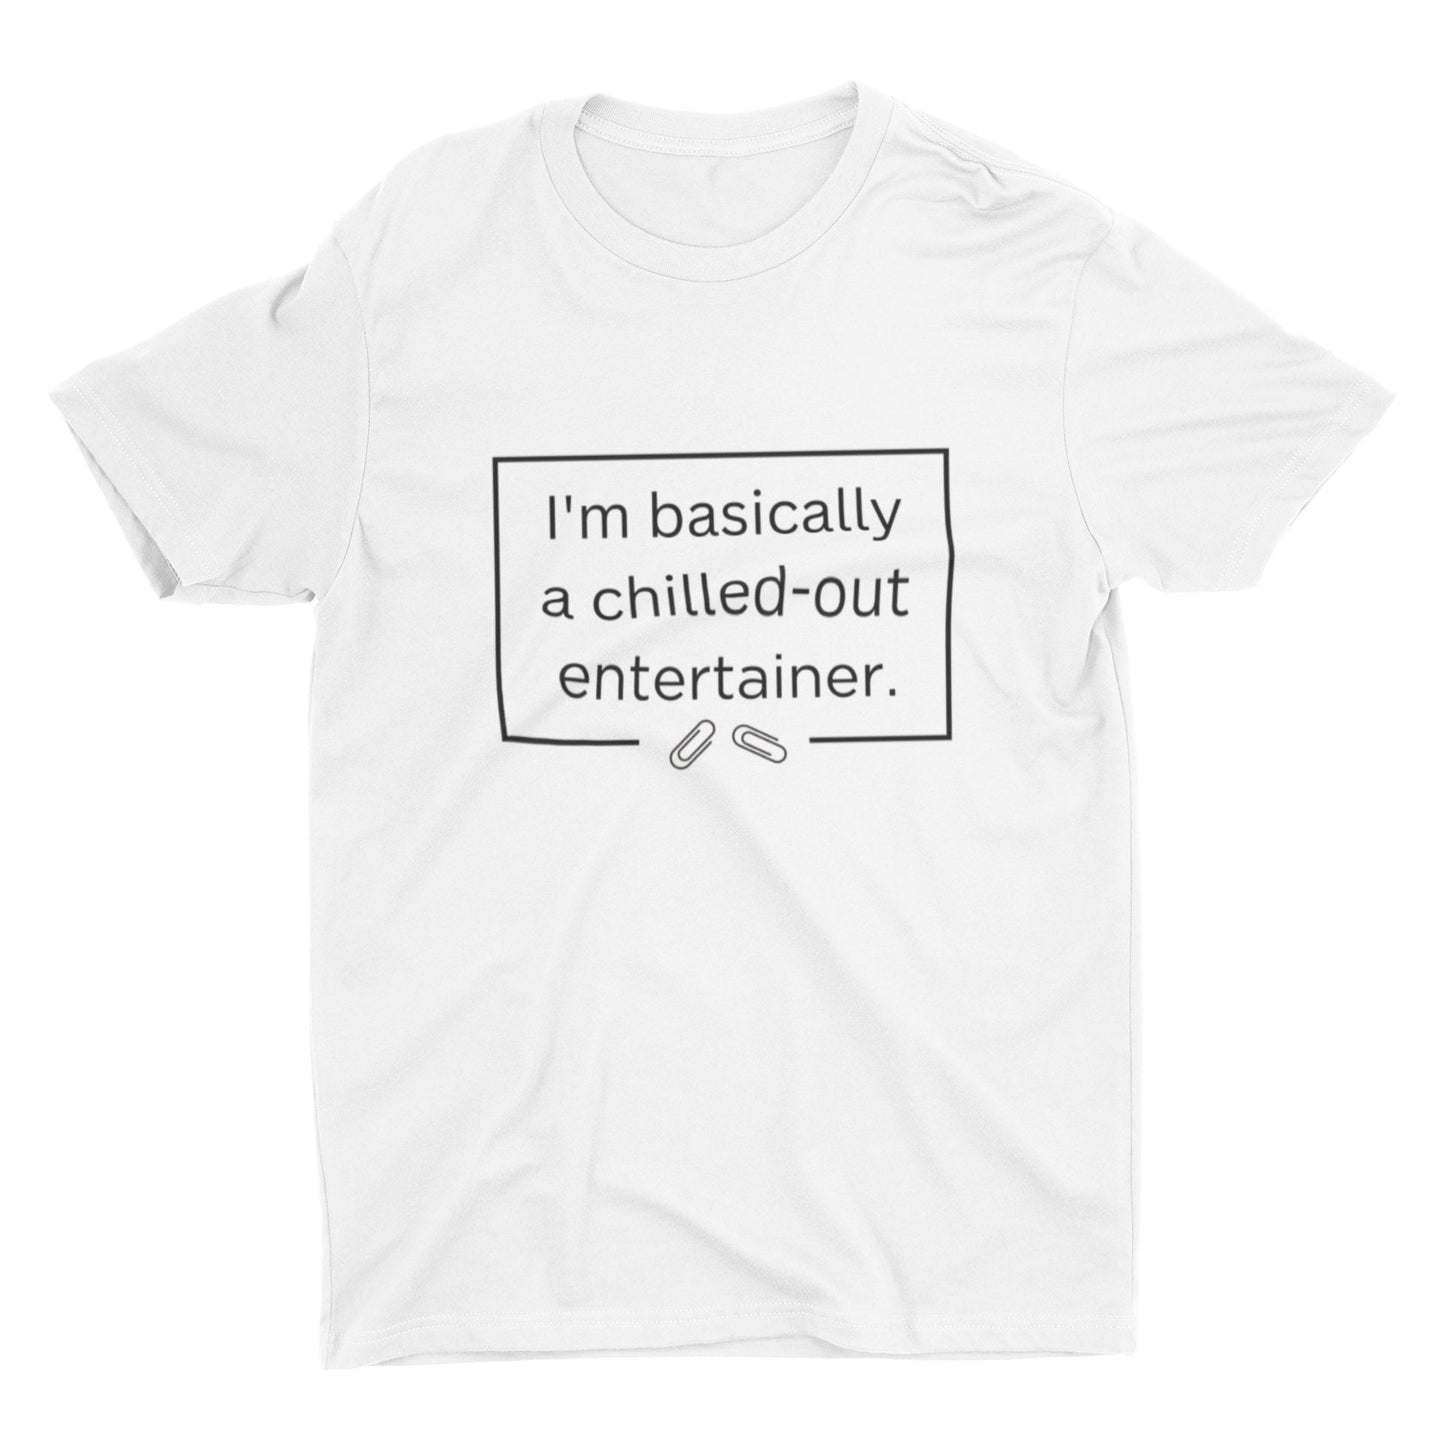 David Brent Chilled-Out Entertainer T Shirt | The Office funny T Shirt | Ricky Gervais